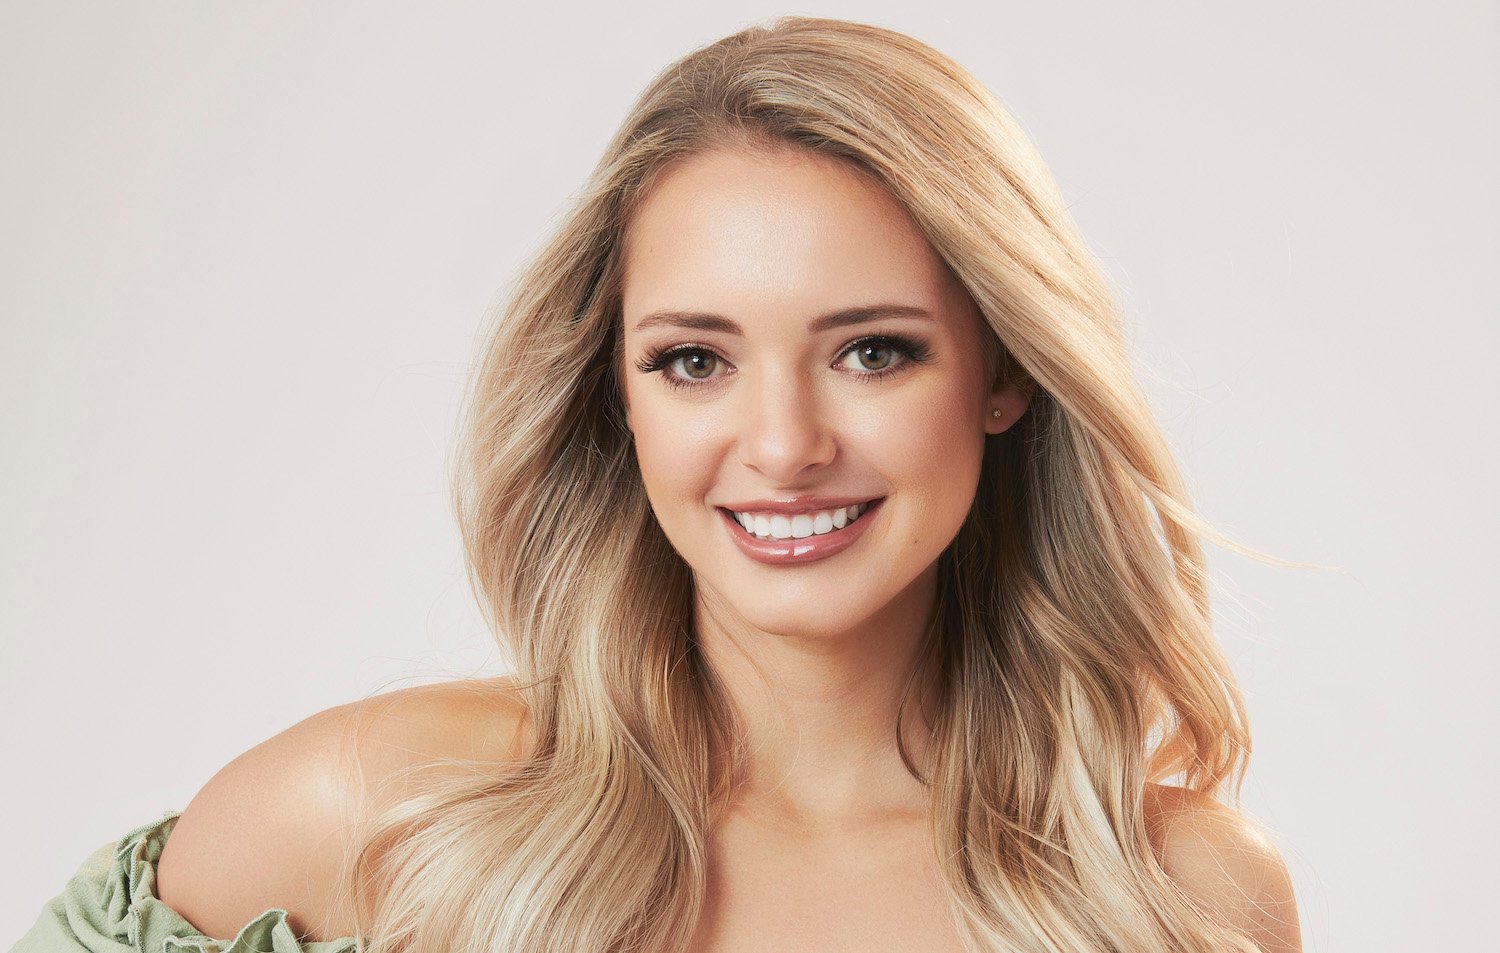 Brooklyn Willie, seen here in her official photo for 'The Bachelor,' fills the villain role in the second half of Zach Shallcross's season.